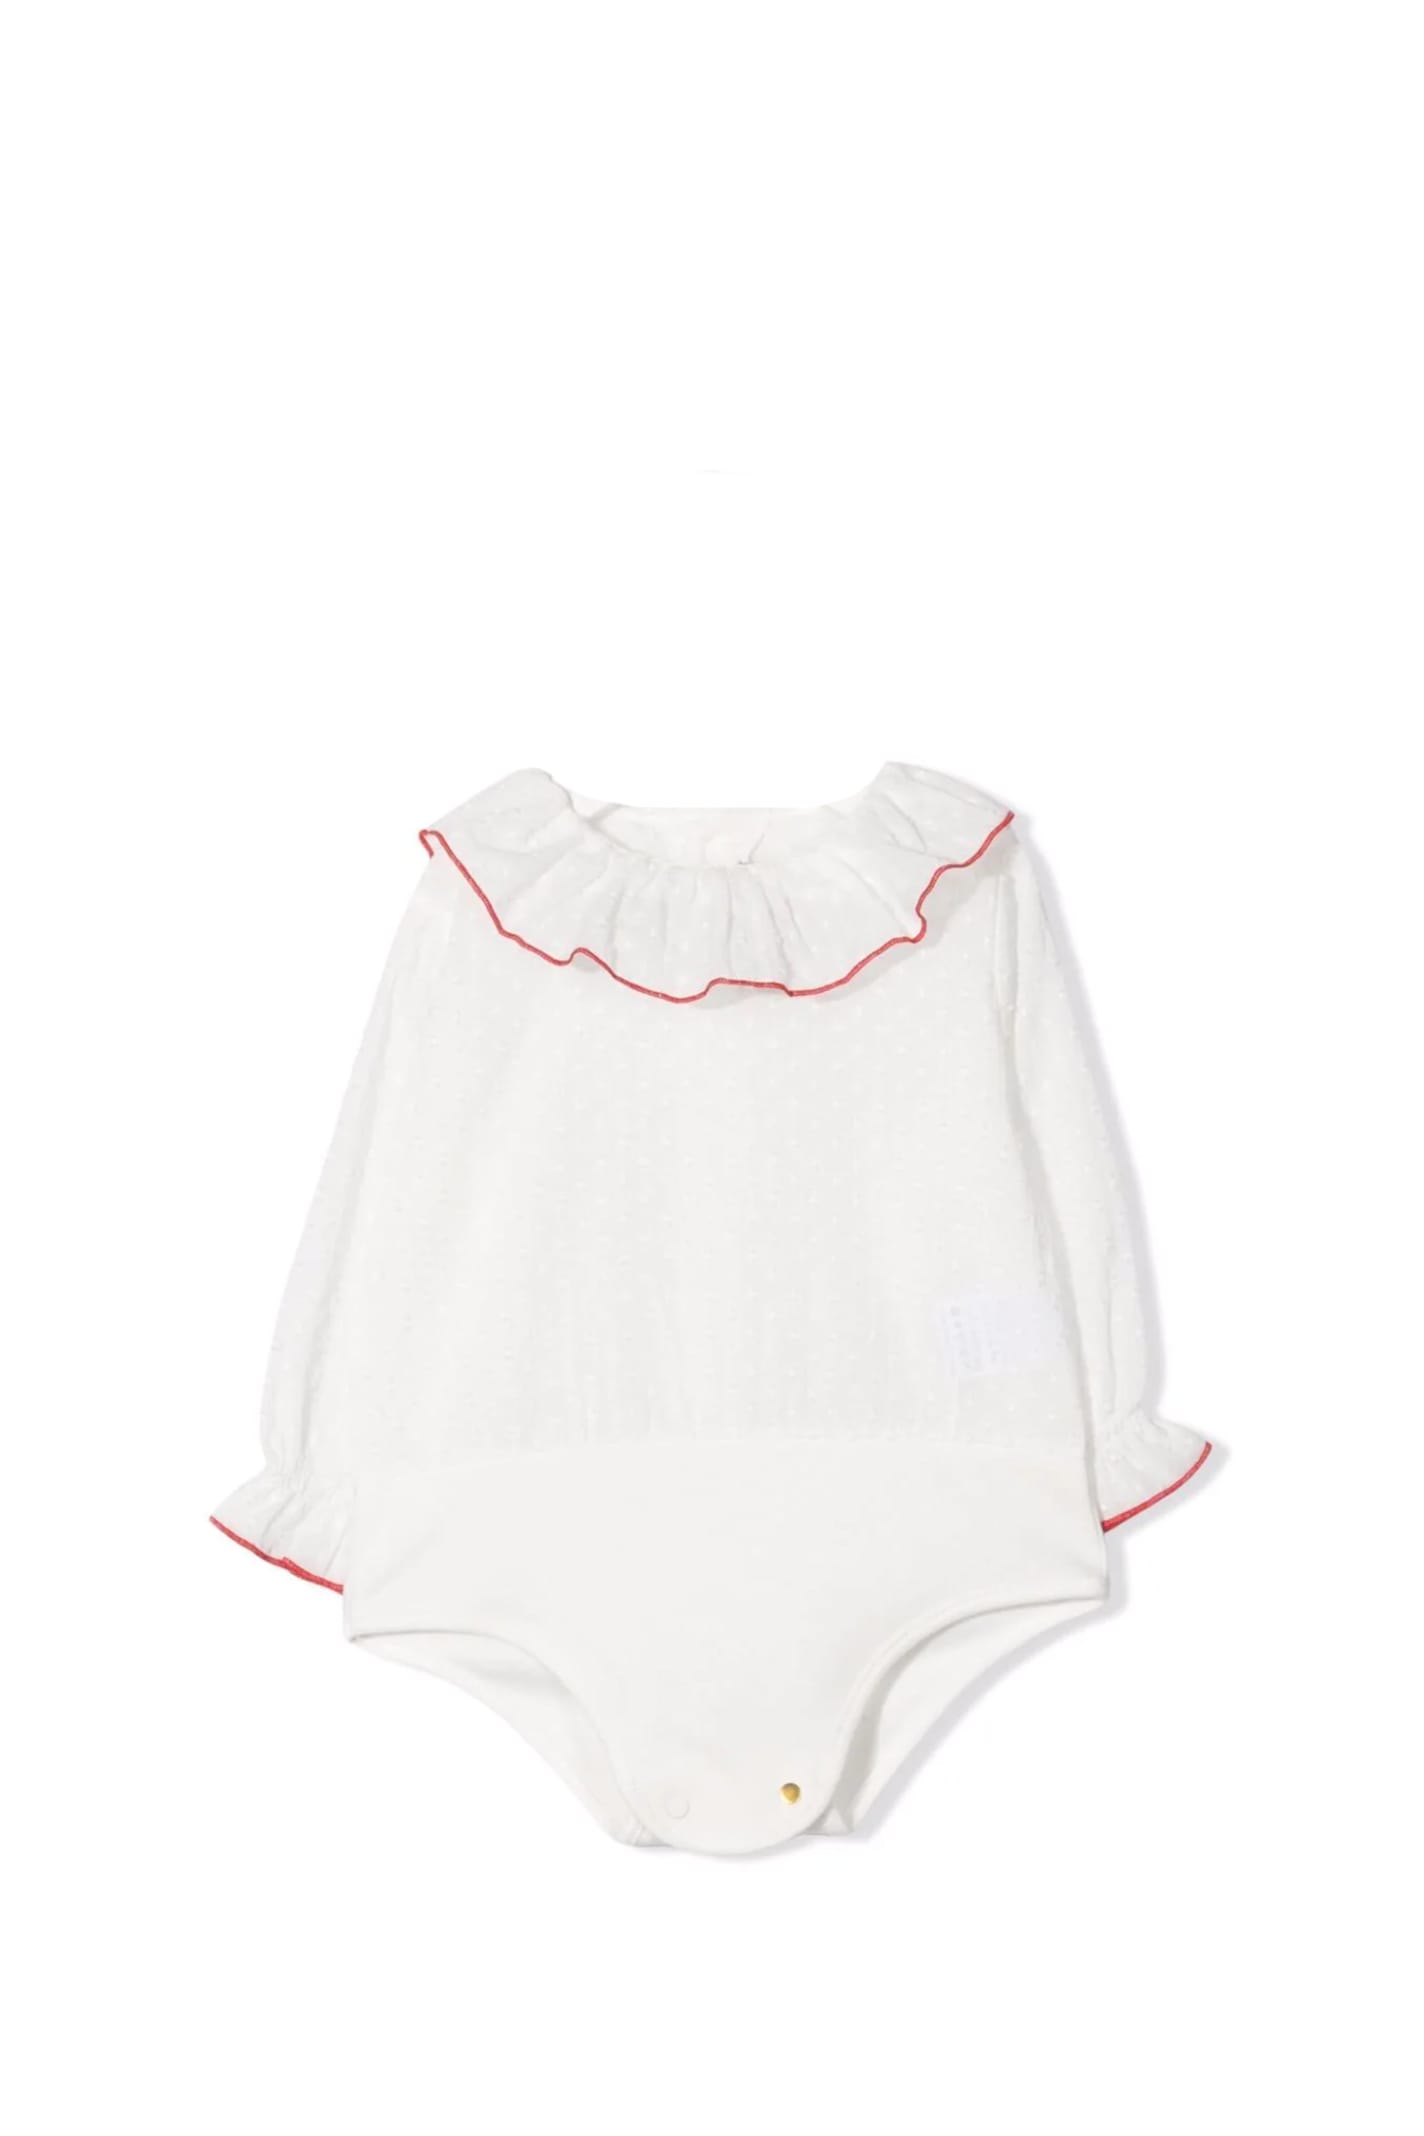 La Stupenderia Babies' Body With Ruches In White